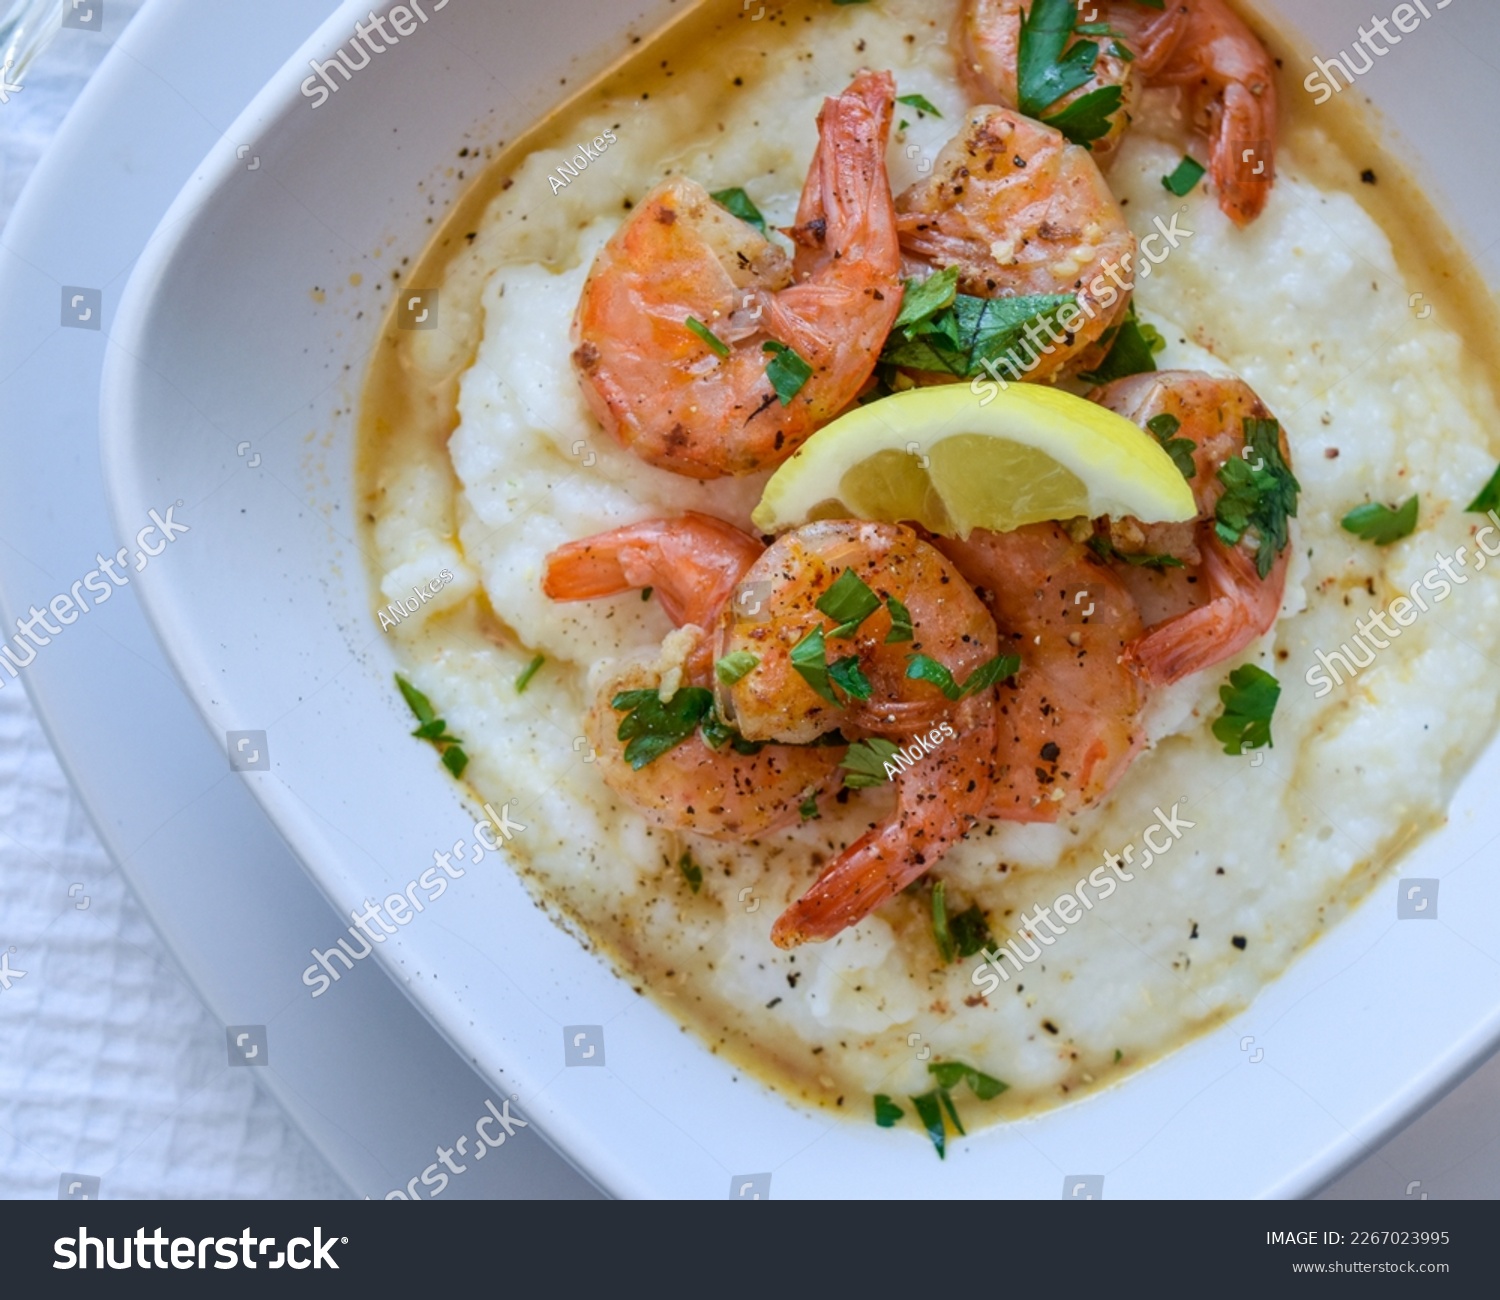 Rich flavors of the South creamy, buttery grits succulent shrimp and a flavorful broth. South Carolina style Southern hospitality, Southern food, nola food, New Orleans, Cajun #2267023995